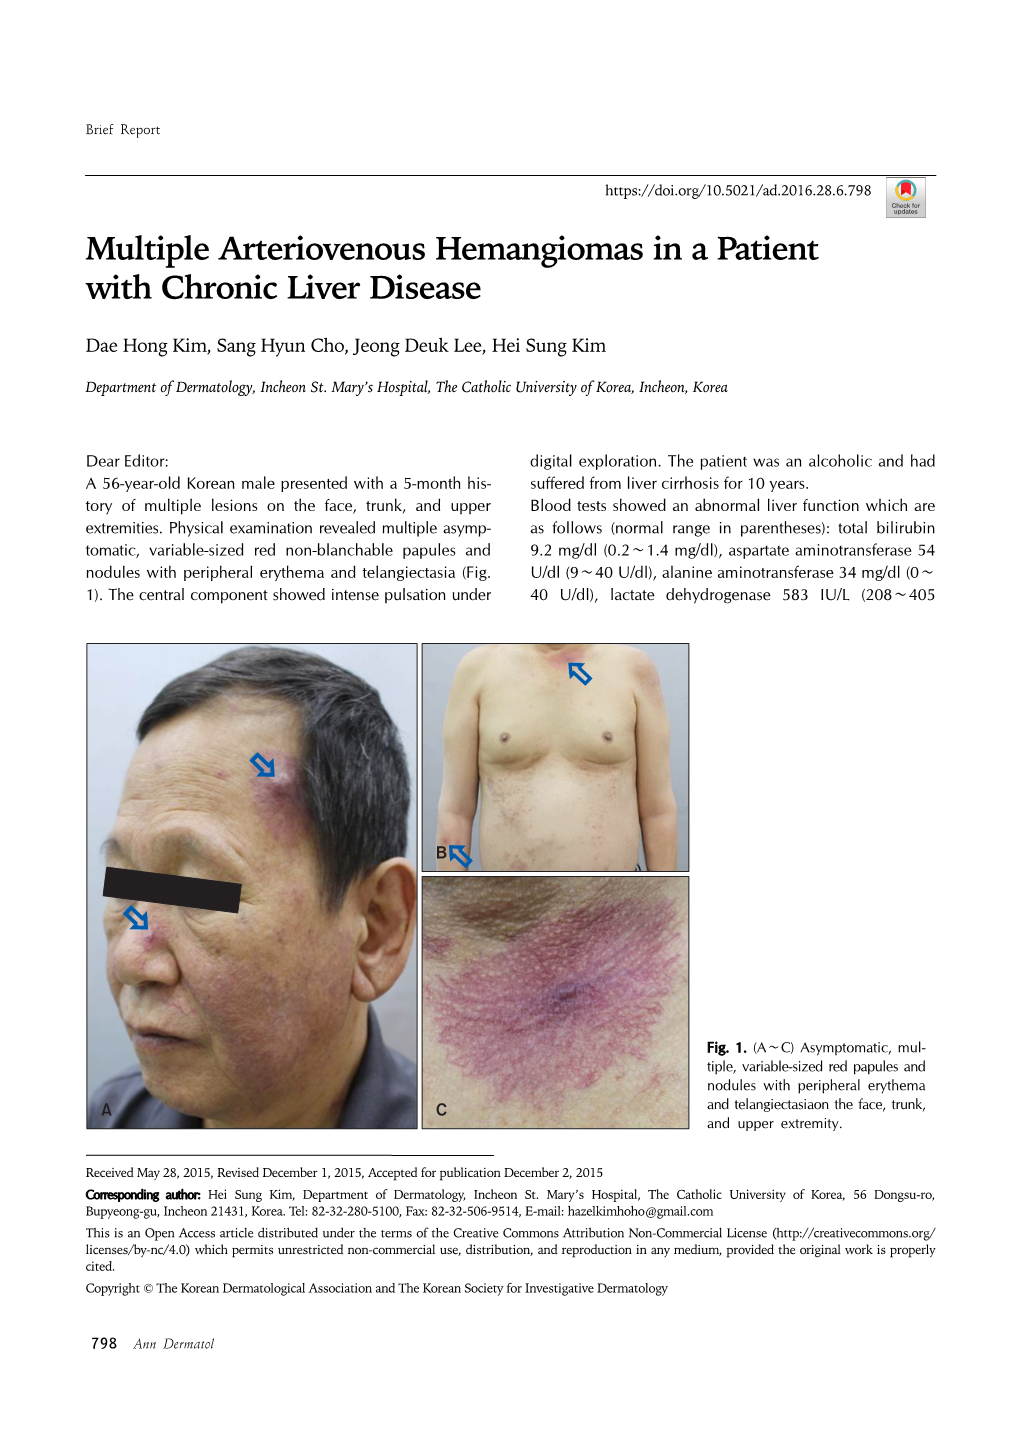 Multiple Arteriovenous Hemangiomas in a Patient with Chronic Liver Disease